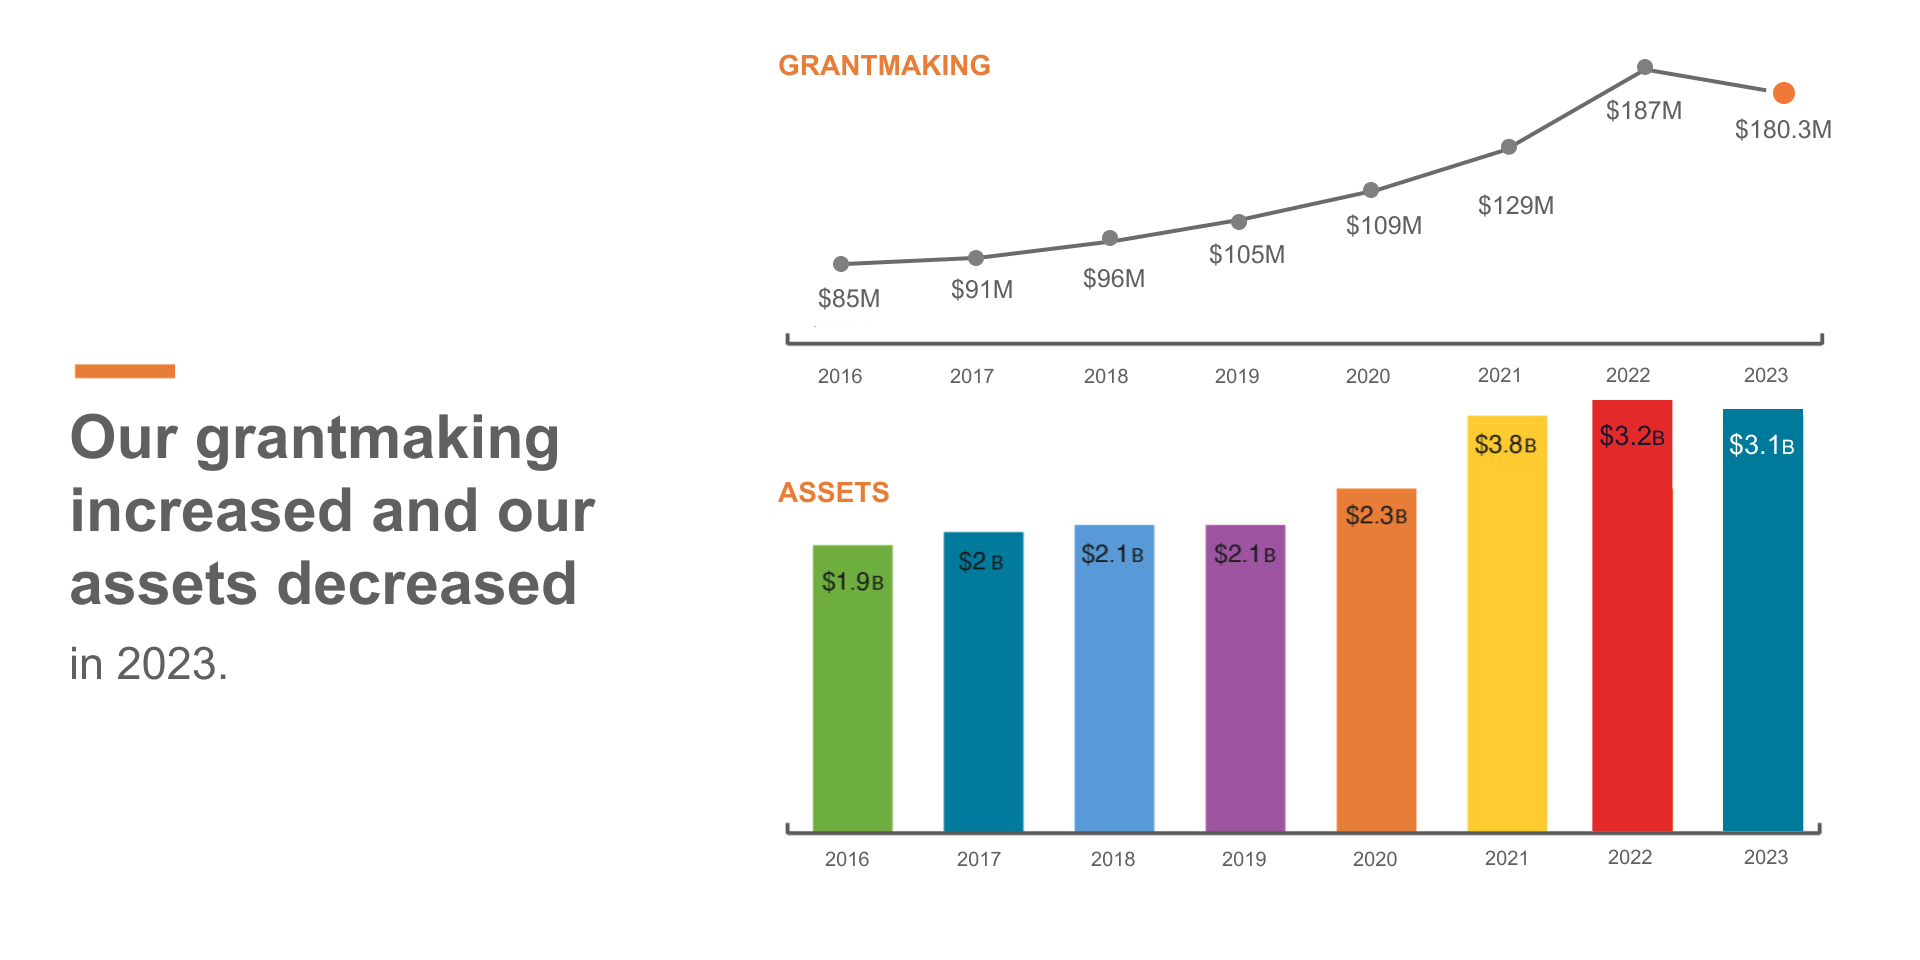 Our grantmaking increased and our assets decreased in 2022.